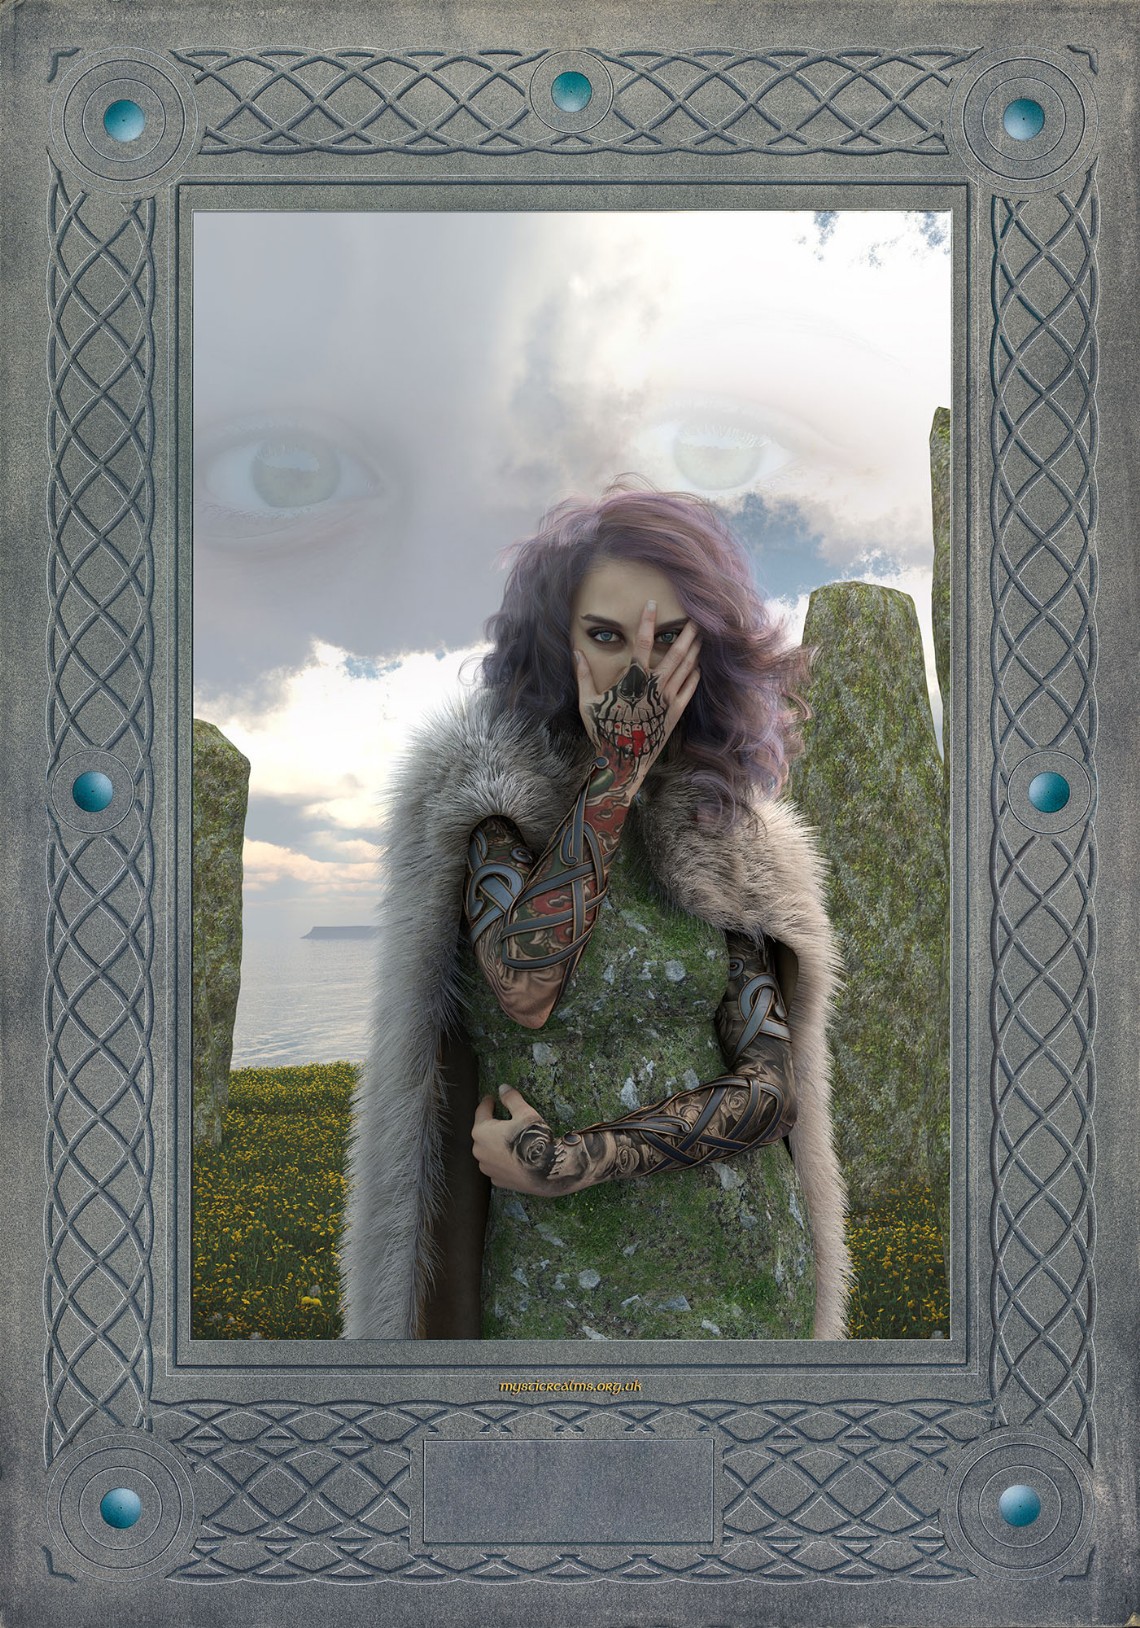 Morgan le Fay, from Lundy, Isle of Avalon by Mystic Realms